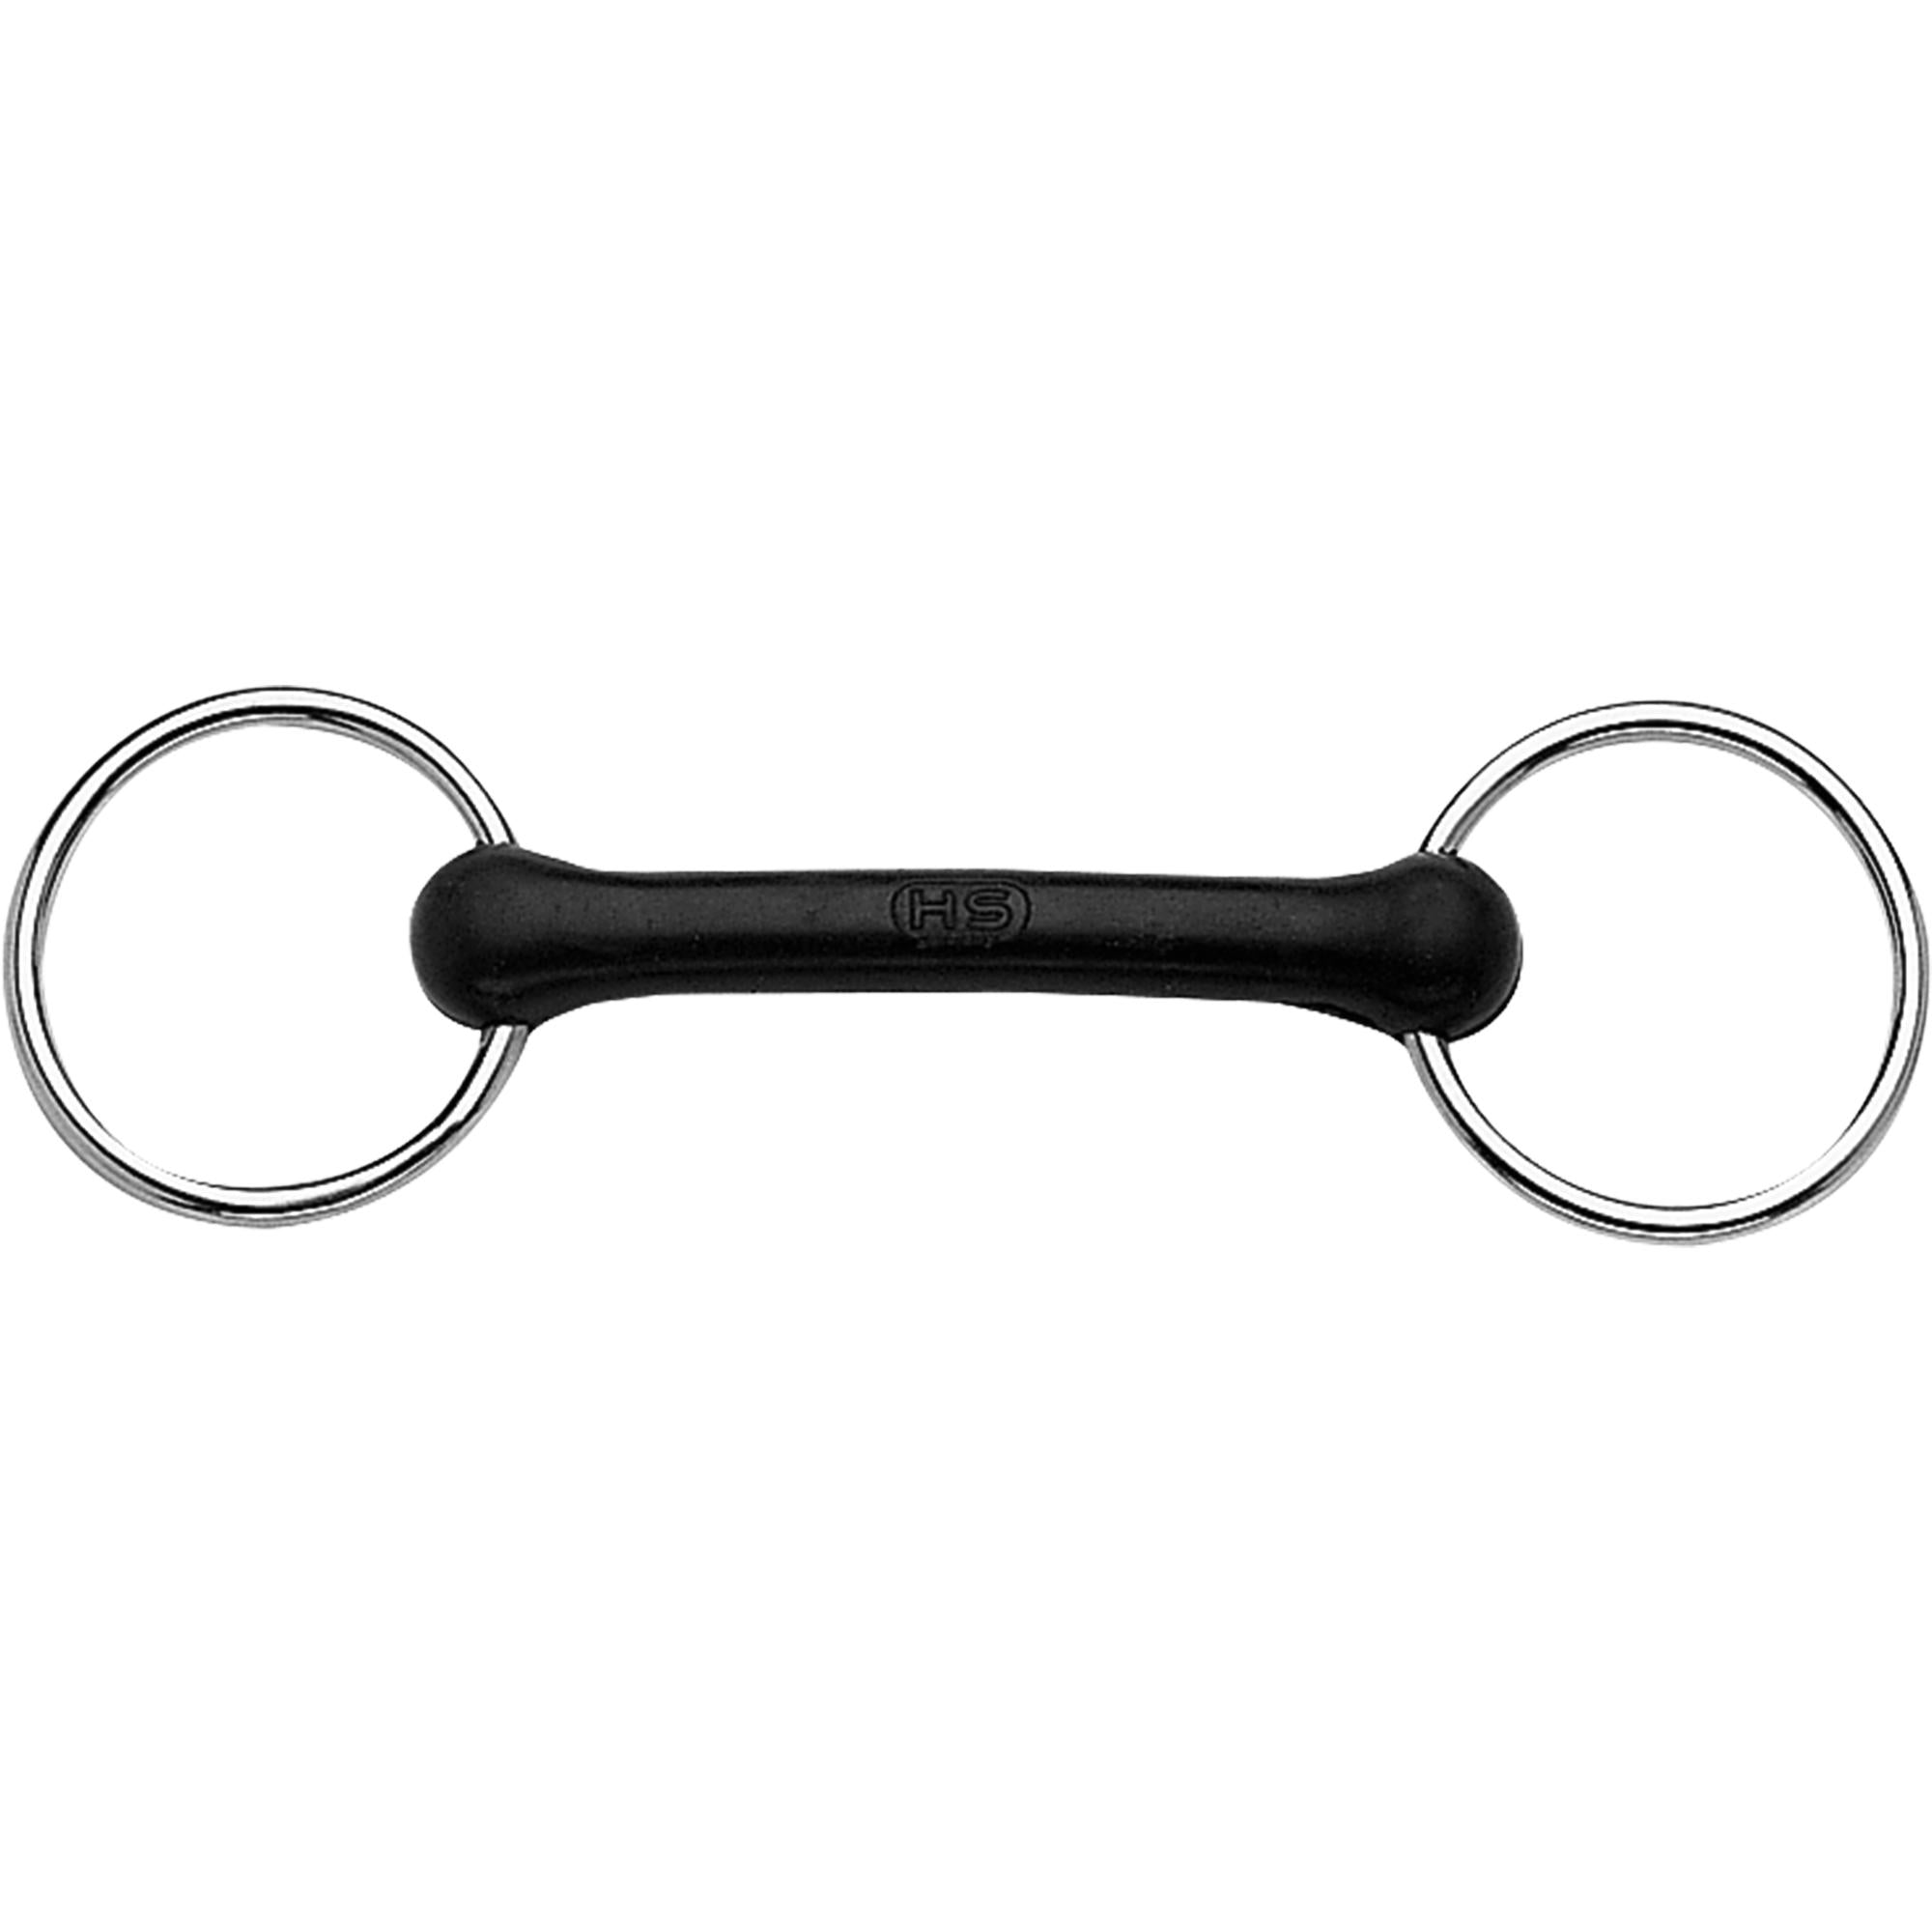 Soft Rubber Loose Ring Mullen Mouth Bit